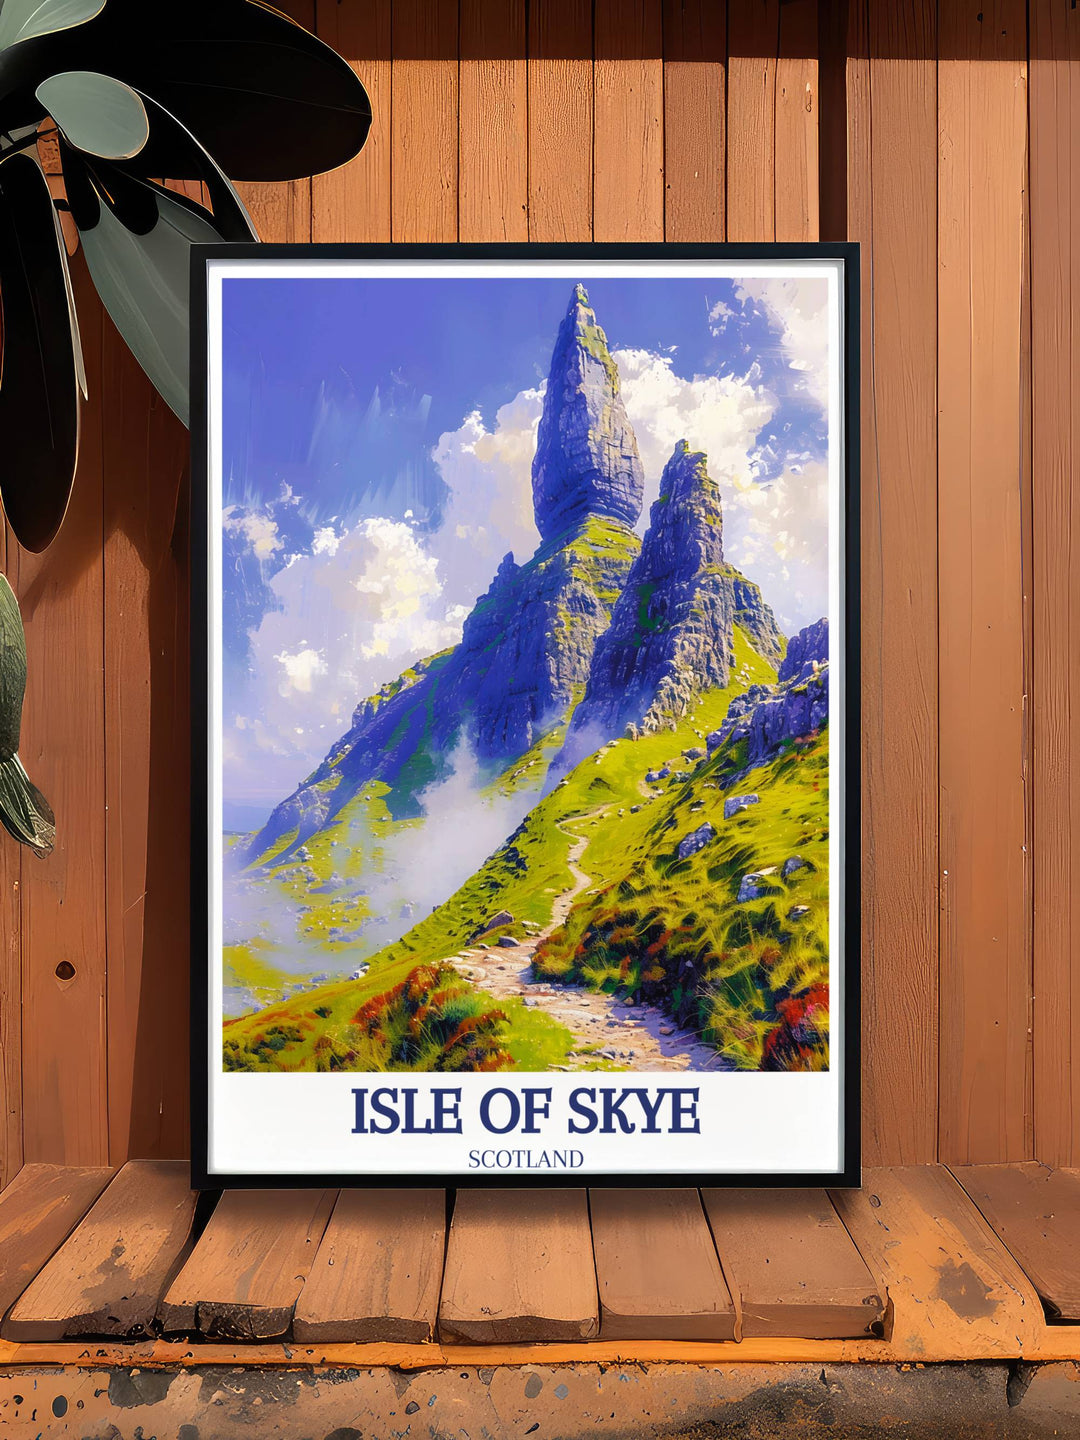 An artistic Isle of Skye photo capturing the sunrise at The Storr, offering a peaceful and inspiring view, perfect for anyone looking to enhance their living space with natural beauty.